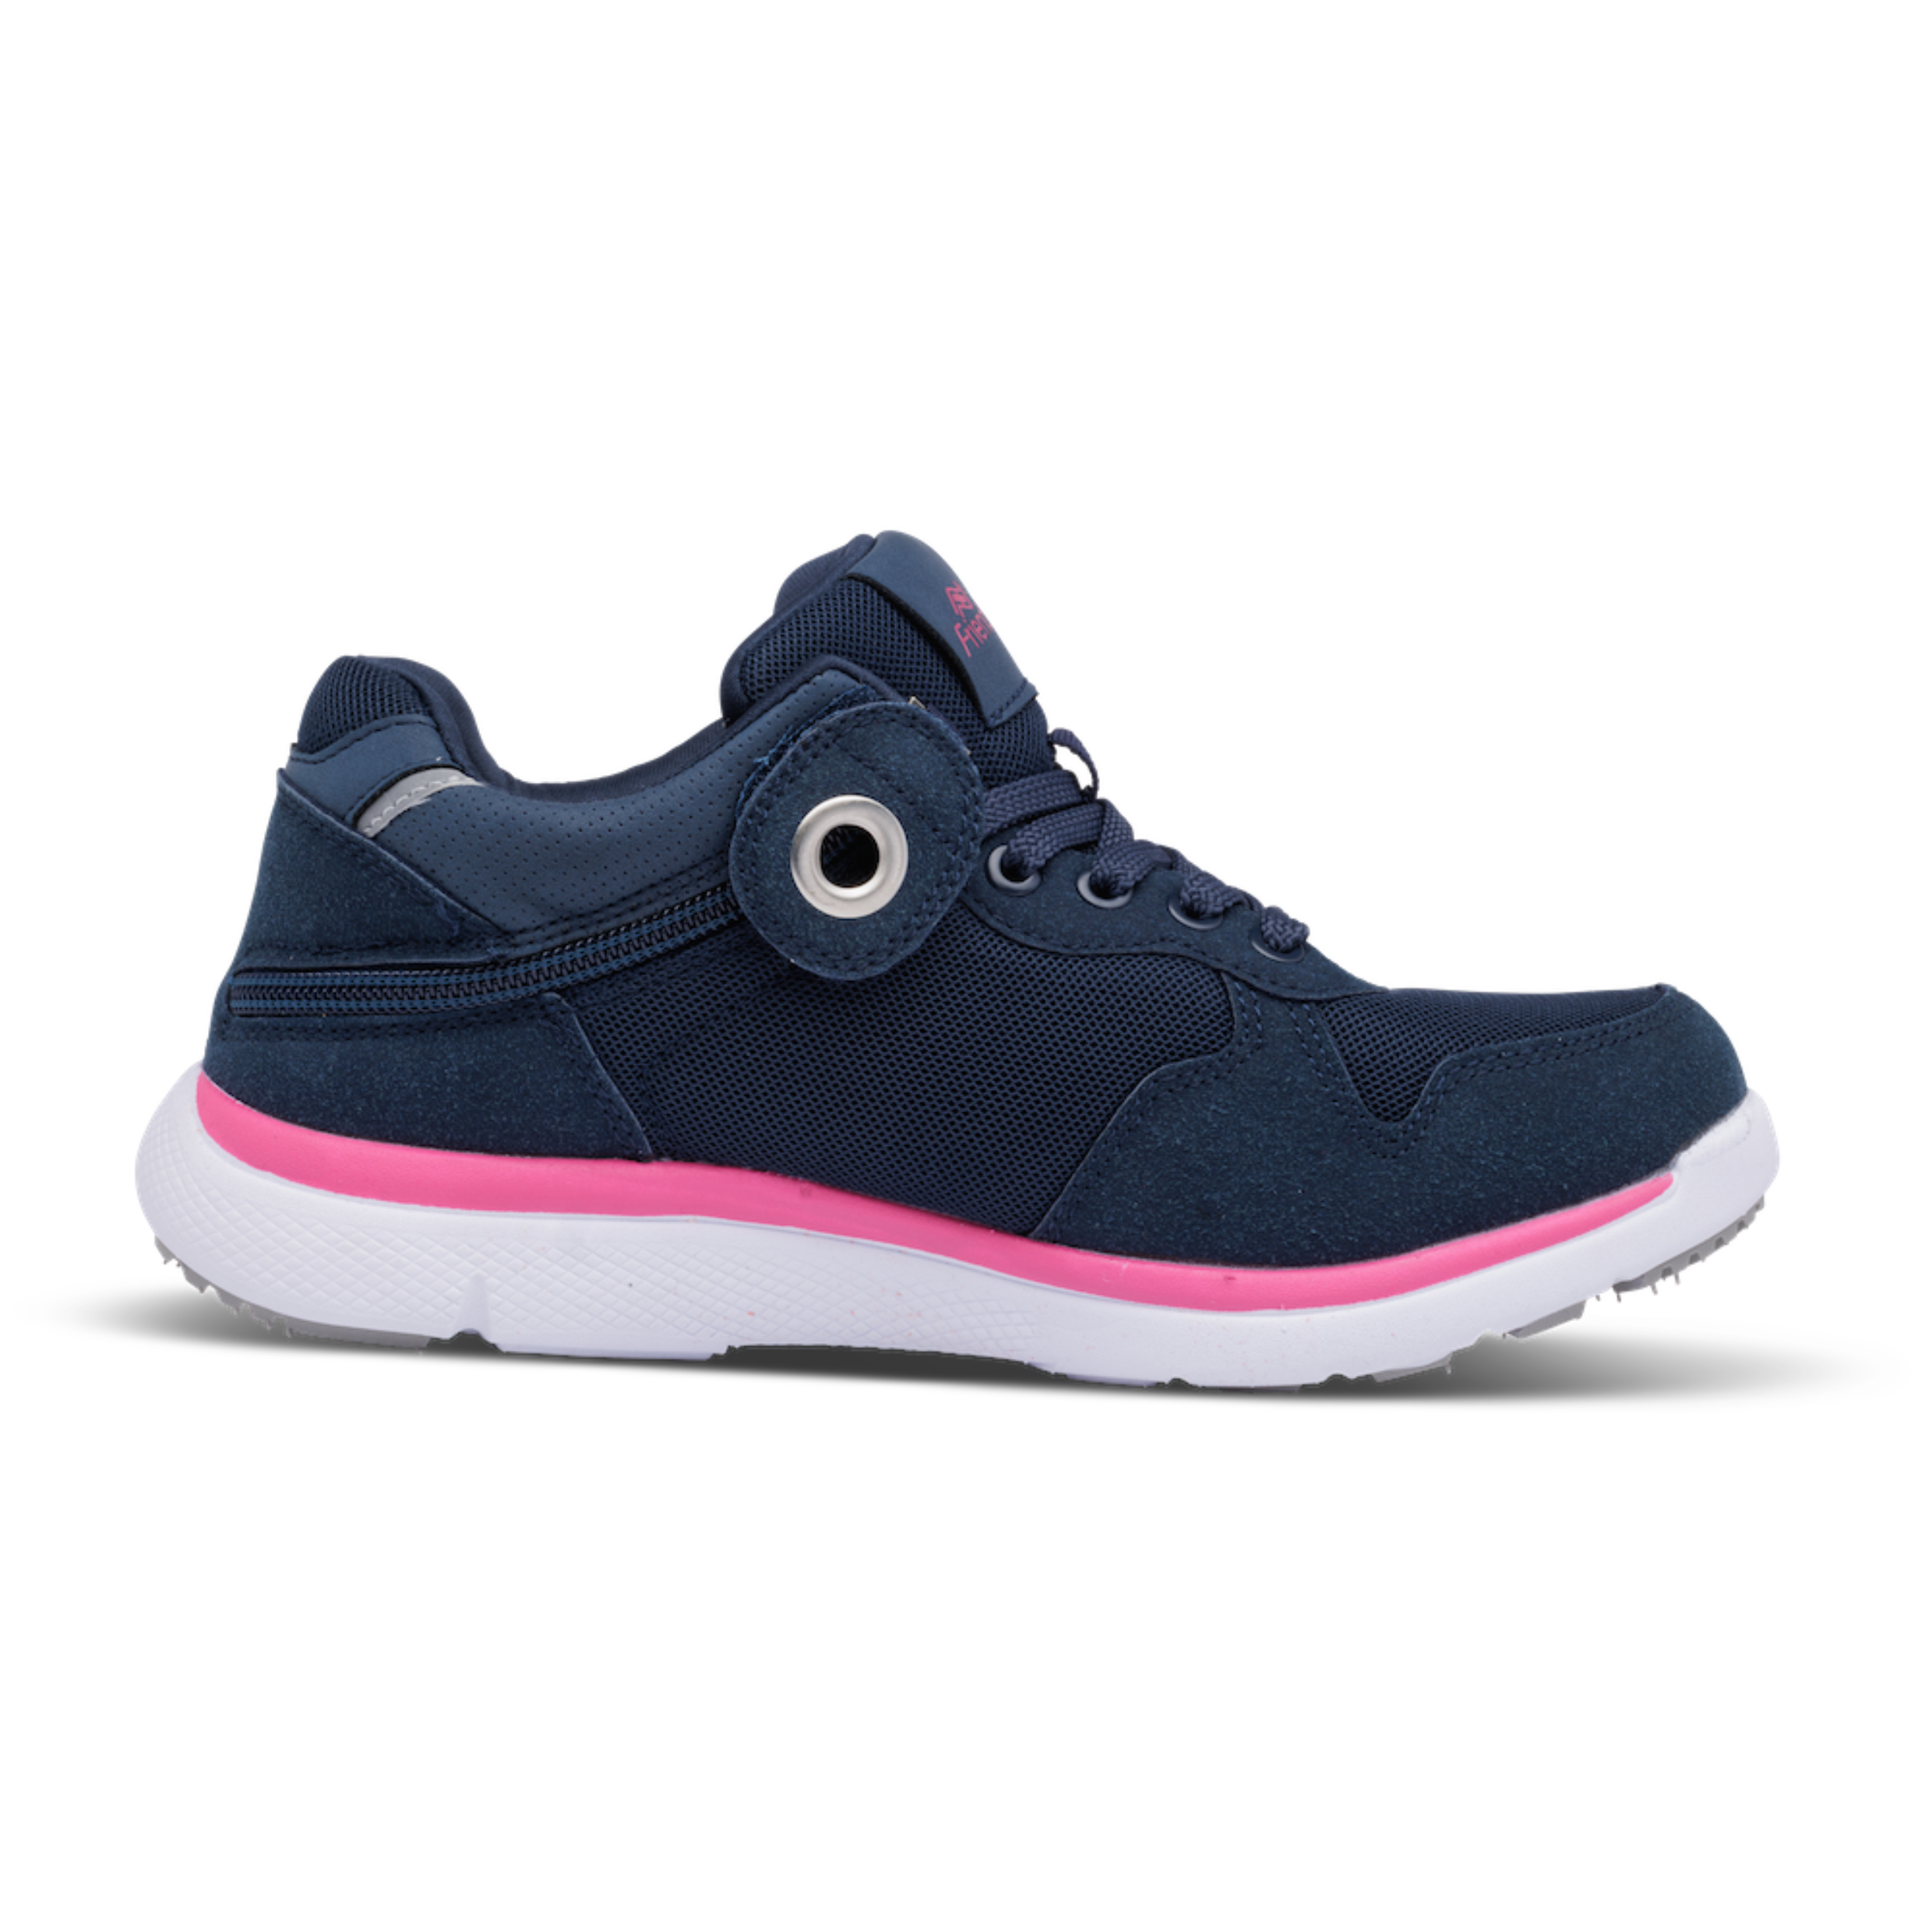 Friendly Shoes Excursion (Women's) - Low Top Navy / Pink